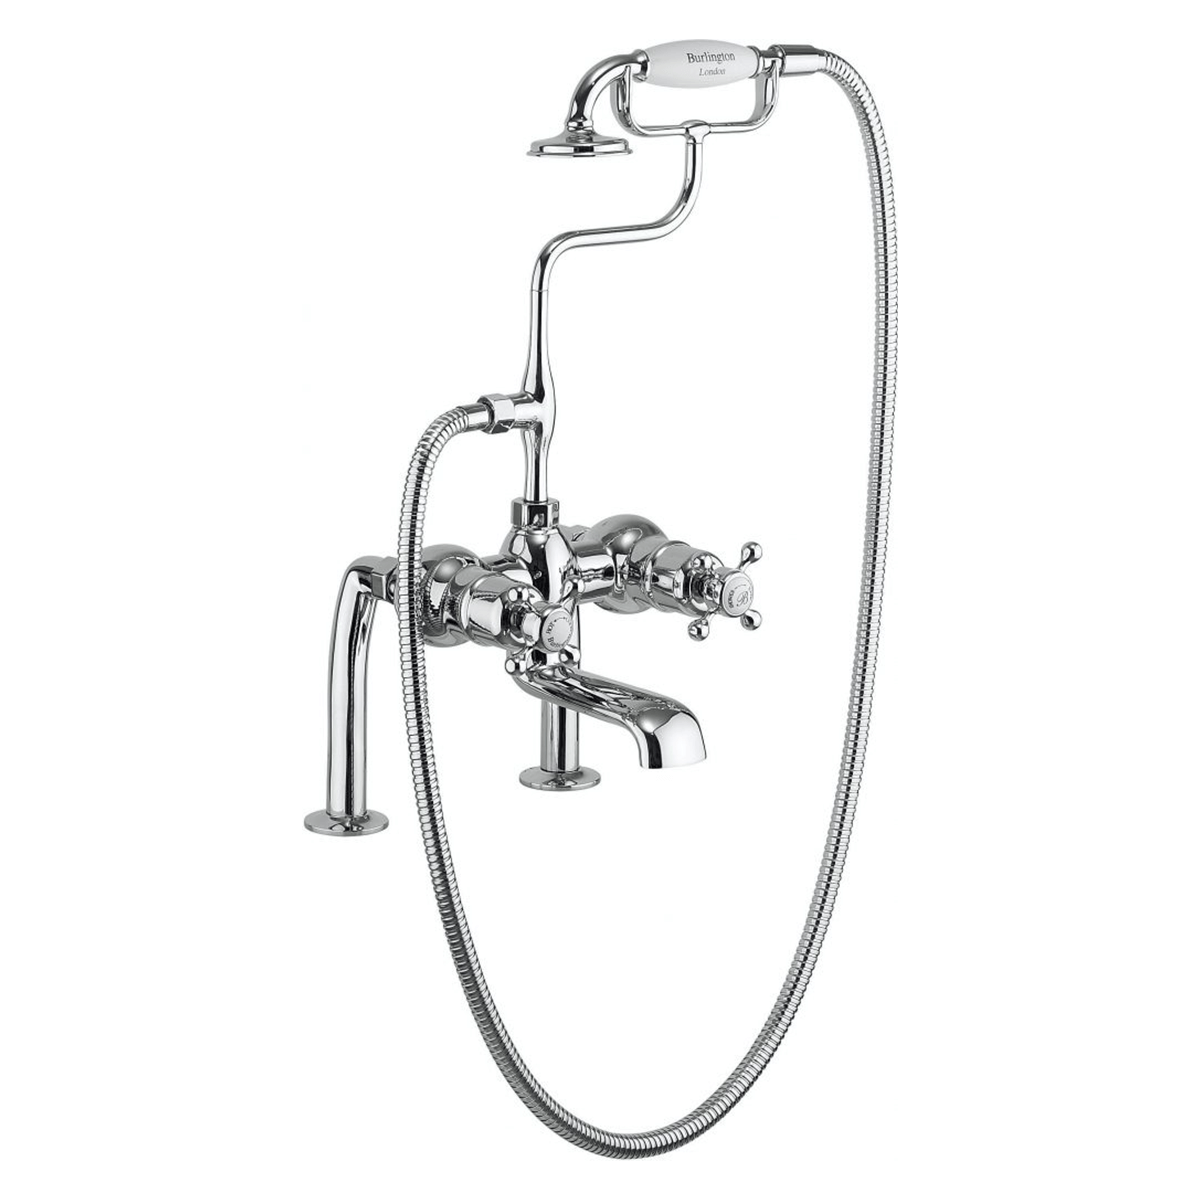 Burlington Tay Thermostatic Two Outlet Bath Shower Mixer with Shower Handset